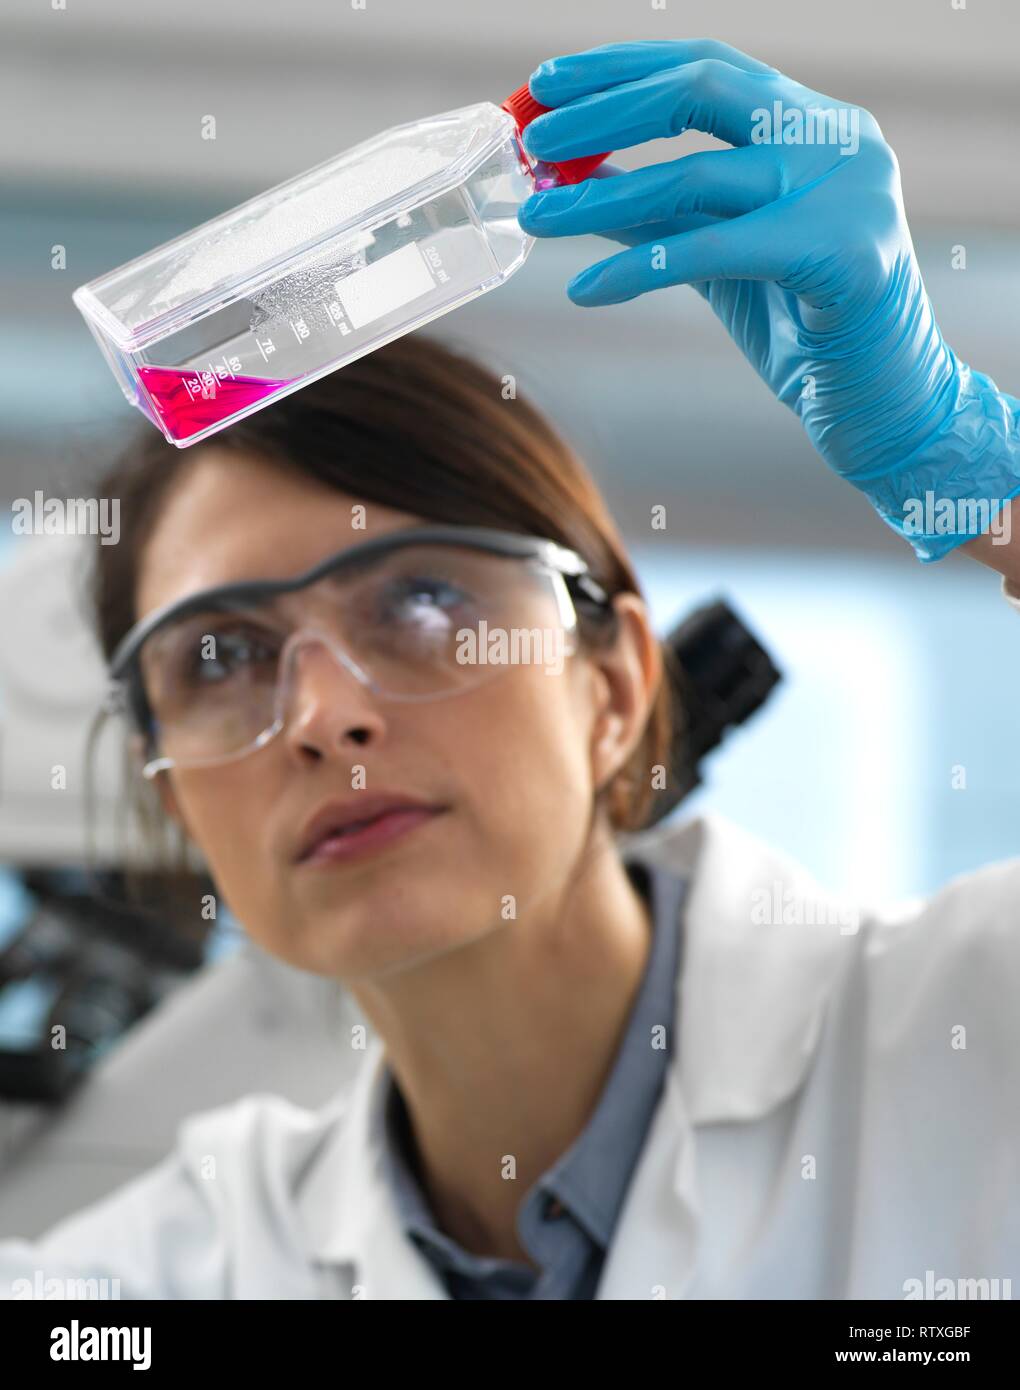 Female cell biologist examining a flask containing stem cells, cultivated in red growth medium. Stock Photo